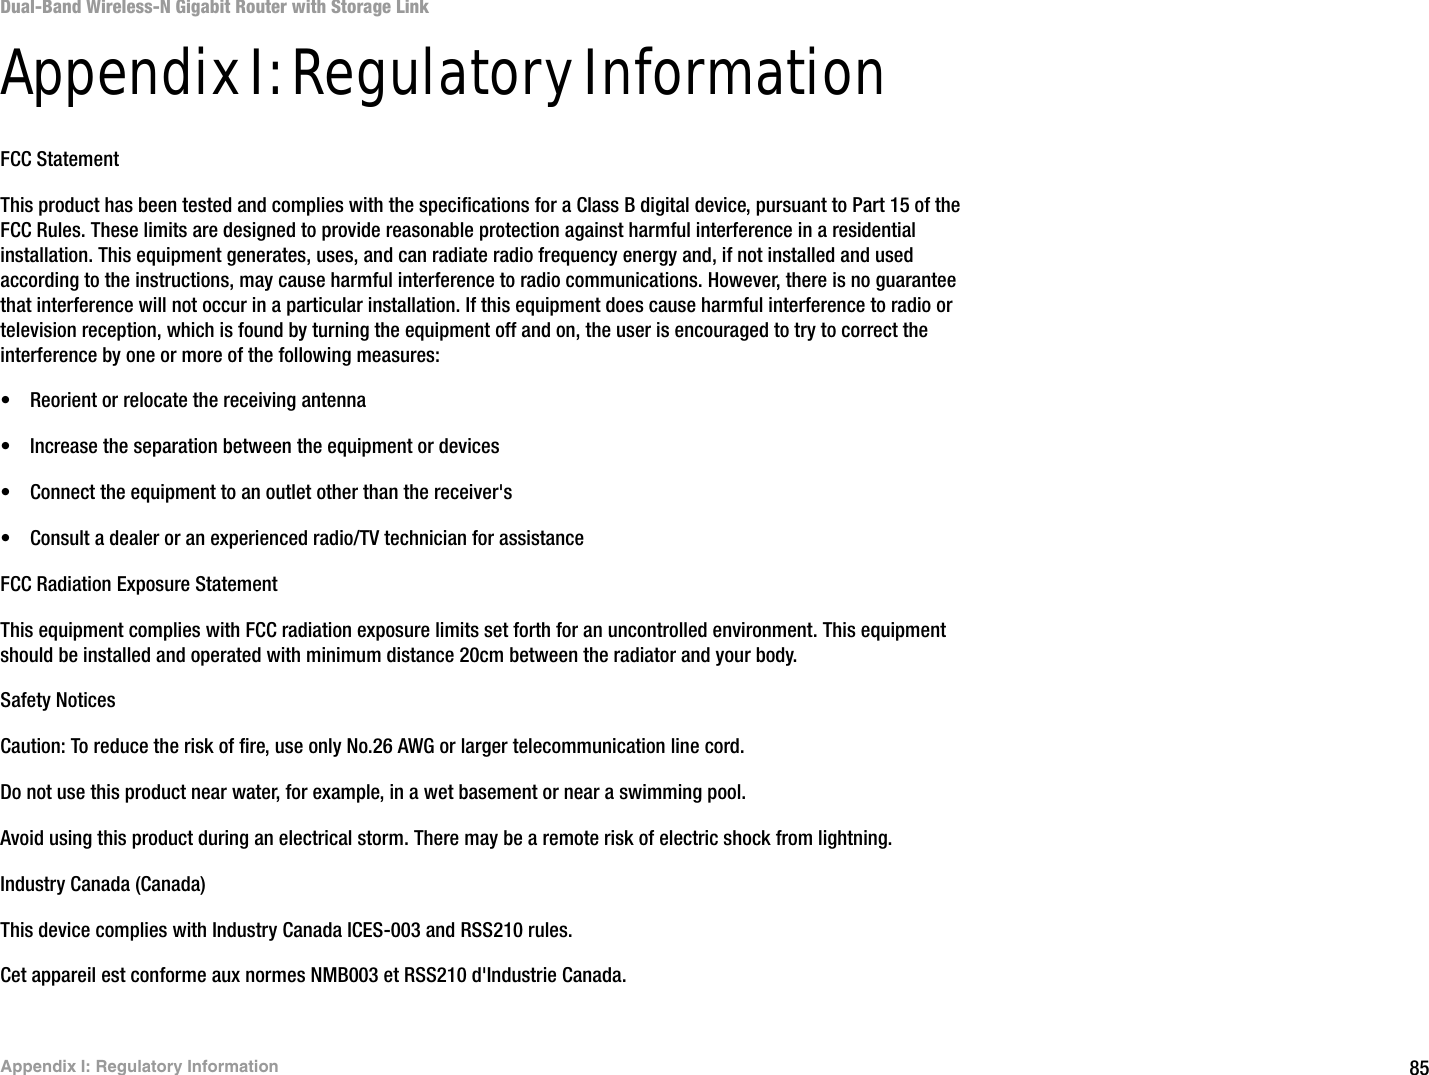 85Appendix I: Regulatory InformationDual-Band Wireless-N Gigabit Router with Storage LinkAppendix I: Regulatory InformationFCC StatementThis product has been tested and complies with the specifications for a Class B digital device, pursuant to Part 15 of the FCC Rules. These limits are designed to provide reasonable protection against harmful interference in a residential installation. This equipment generates, uses, and can radiate radio frequency energy and, if not installed and used according to the instructions, may cause harmful interference to radio communications. However, there is no guarantee that interference will not occur in a particular installation. If this equipment does cause harmful interference to radio or television reception, which is found by turning the equipment off and on, the user is encouraged to try to correct the interference by one or more of the following measures:• Reorient or relocate the receiving antenna• Increase the separation between the equipment or devices• Connect the equipment to an outlet other than the receiver&apos;s• Consult a dealer or an experienced radio/TV technician for assistanceFCC Radiation Exposure StatementThis equipment complies with FCC radiation exposure limits set forth for an uncontrolled environment. This equipment should be installed and operated with minimum distance 20cm between the radiator and your body.Safety NoticesCaution: To reduce the risk of fire, use only No.26 AWG or larger telecommunication line cord.Do not use this product near water, for example, in a wet basement or near a swimming pool.Avoid using this product during an electrical storm. There may be a remote risk of electric shock from lightning.Industry Canada (Canada)This device complies with Industry Canada ICES-003 and RSS210 rules.Cet appareil est conforme aux normes NMB003 et RSS210 d&apos;Industrie Canada.